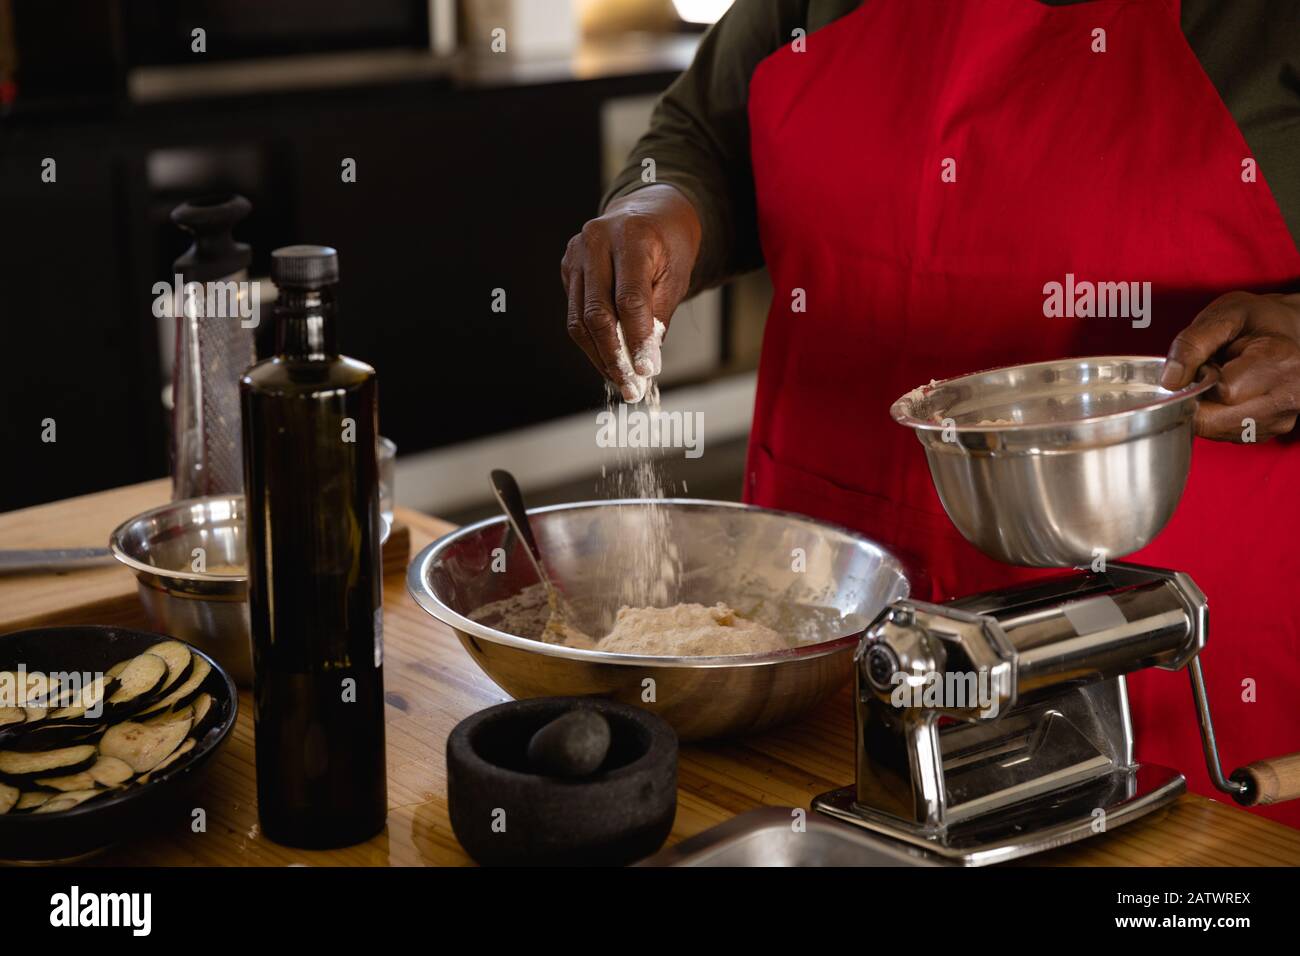 African chef cooking Stock Photo